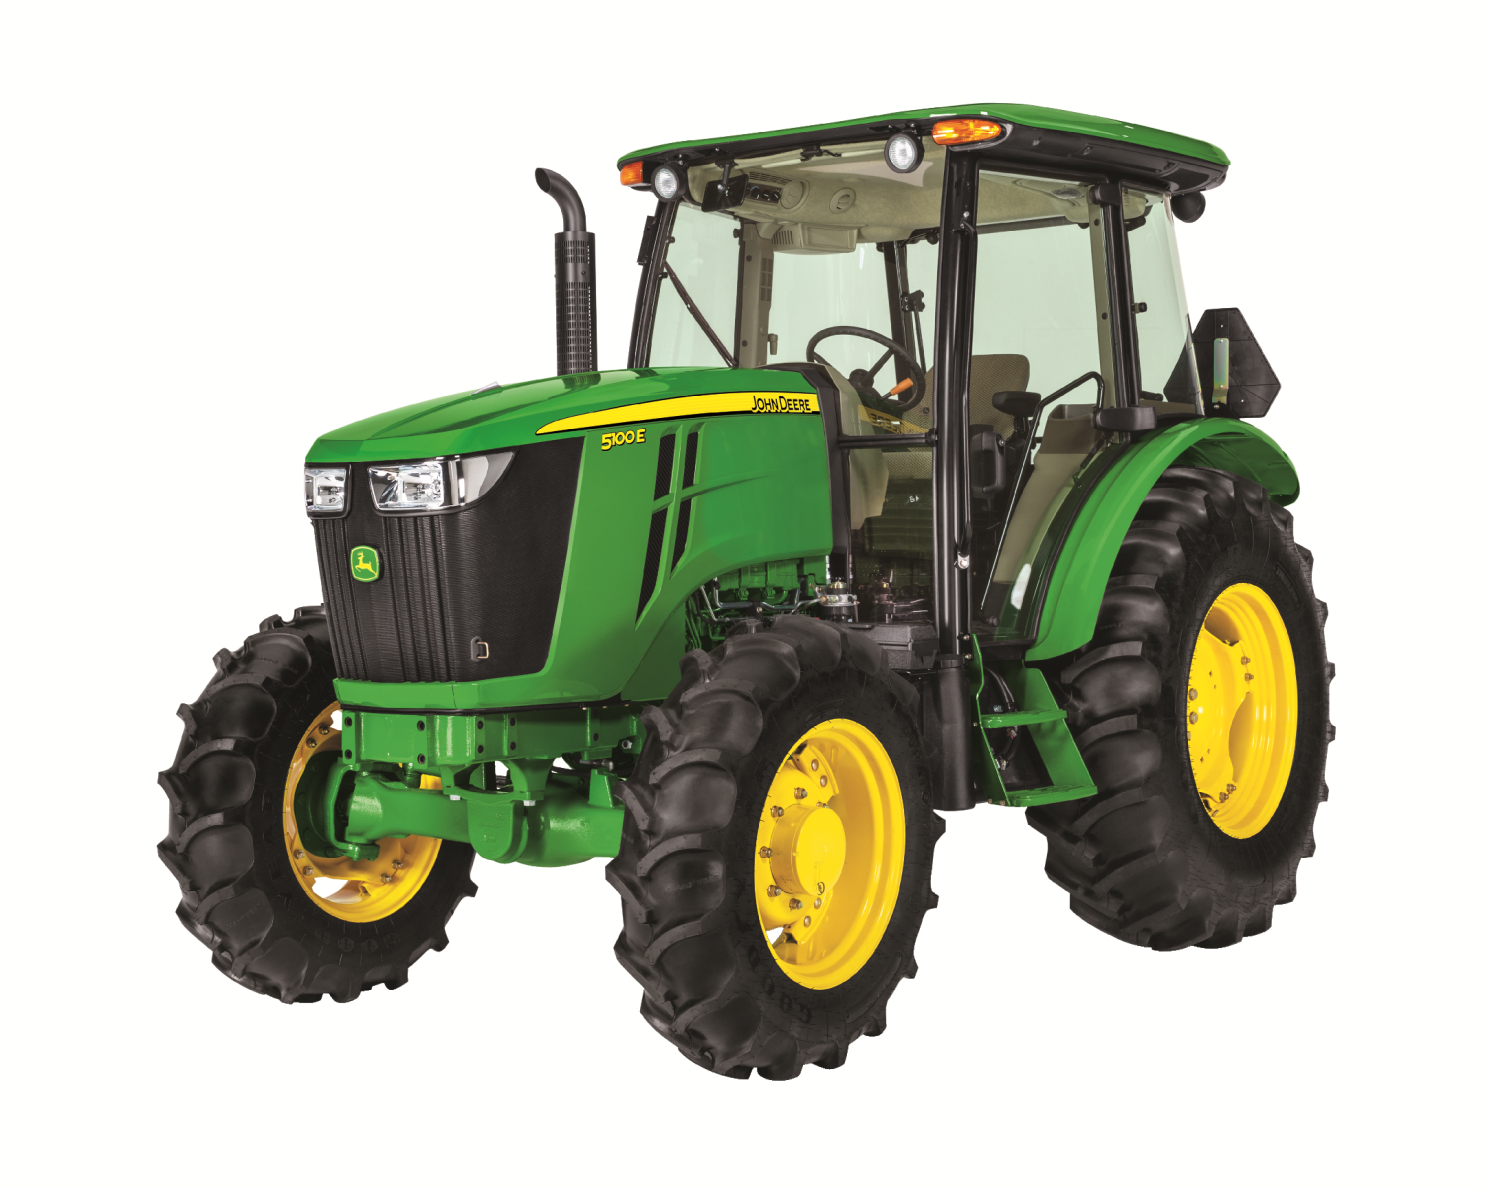 0% Apr For 60 Months Or Get Up To $3000 Off On (85 100Hp) John Deere 5E Series Utility Tractors 5100E - John Deere Tractor, Transparent background PNG HD thumbnail